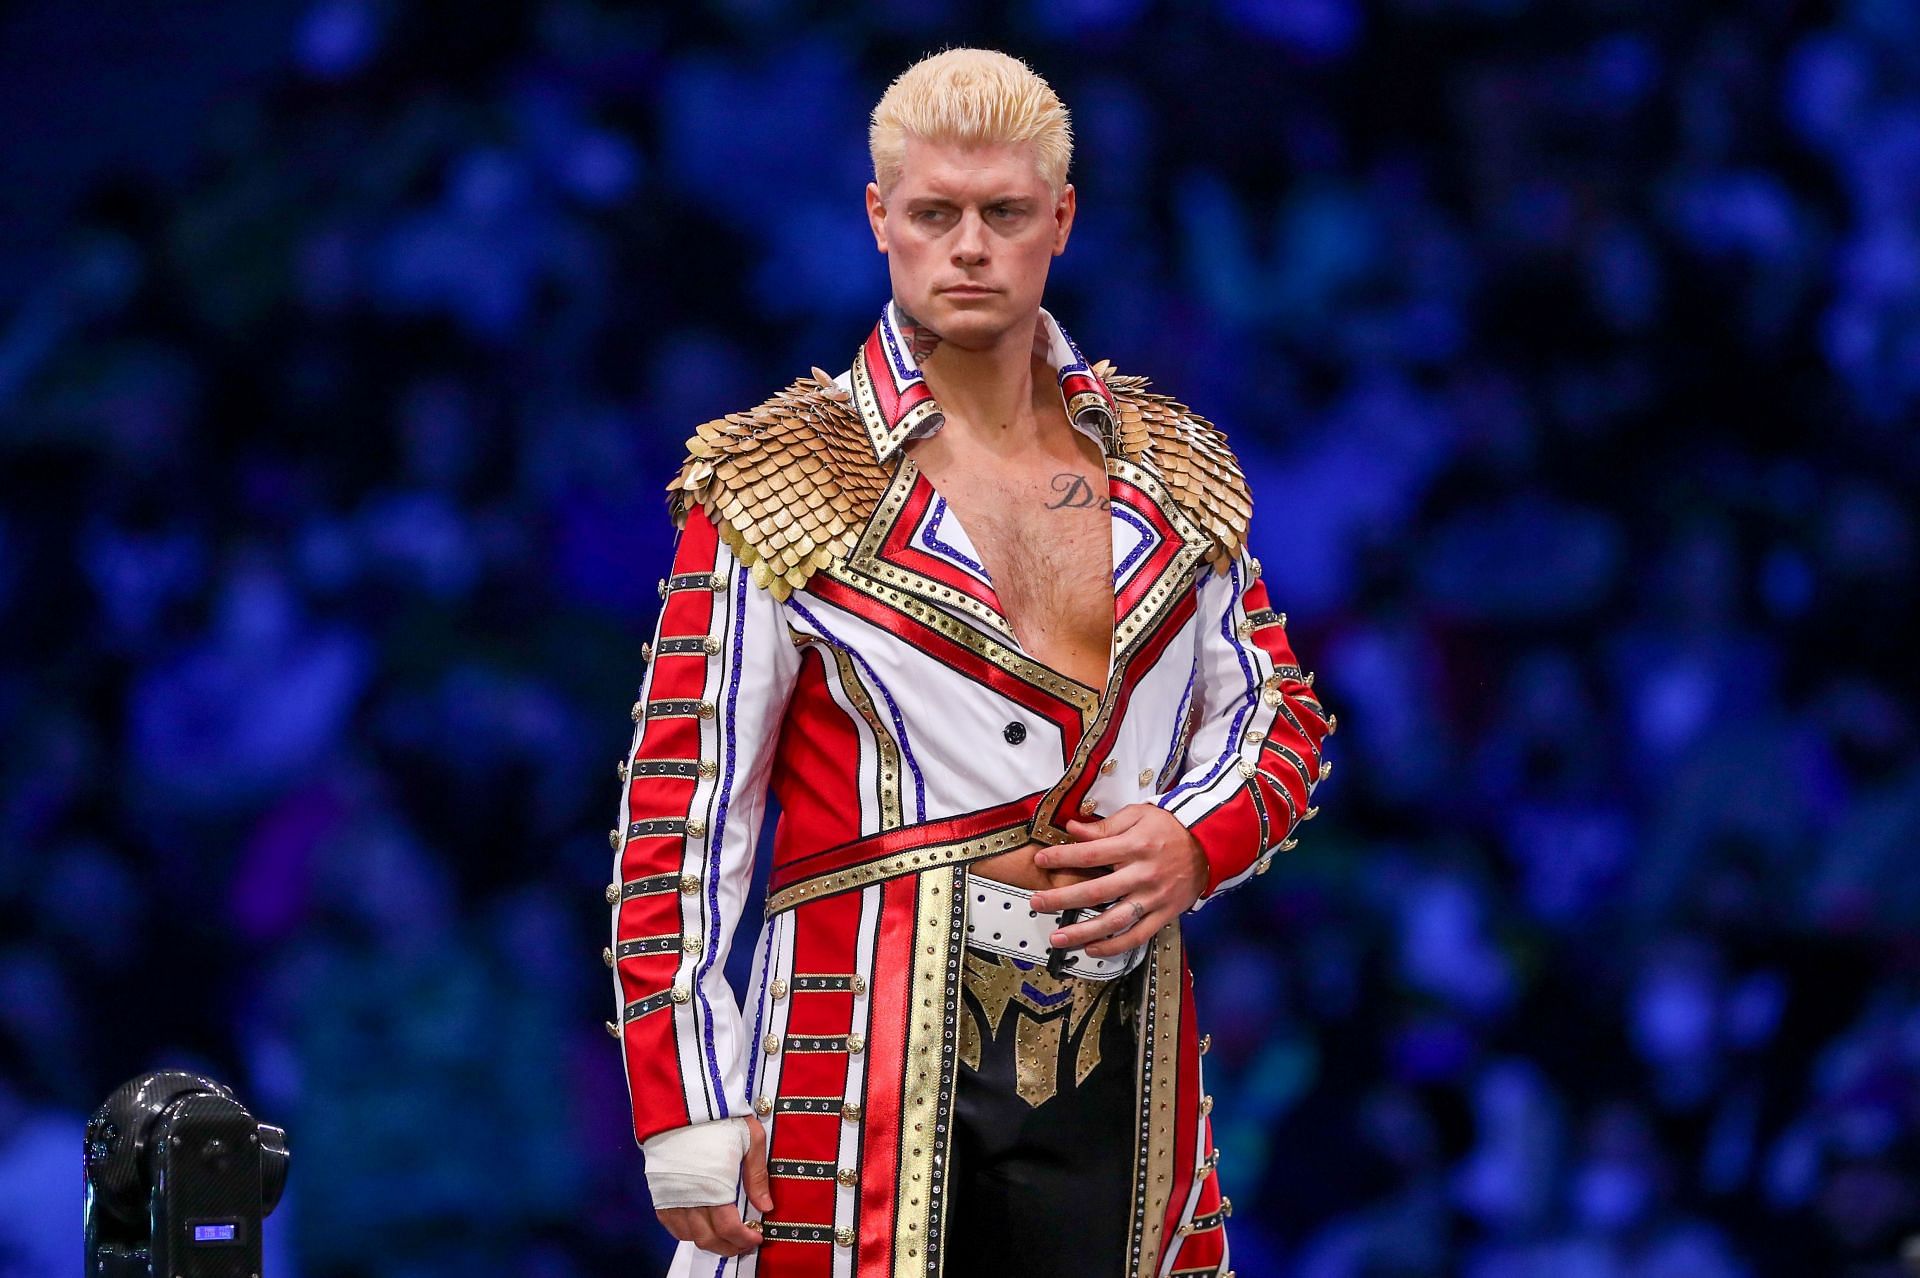 Cody Rhodes recently exited WWE and could be on his way back to WWE